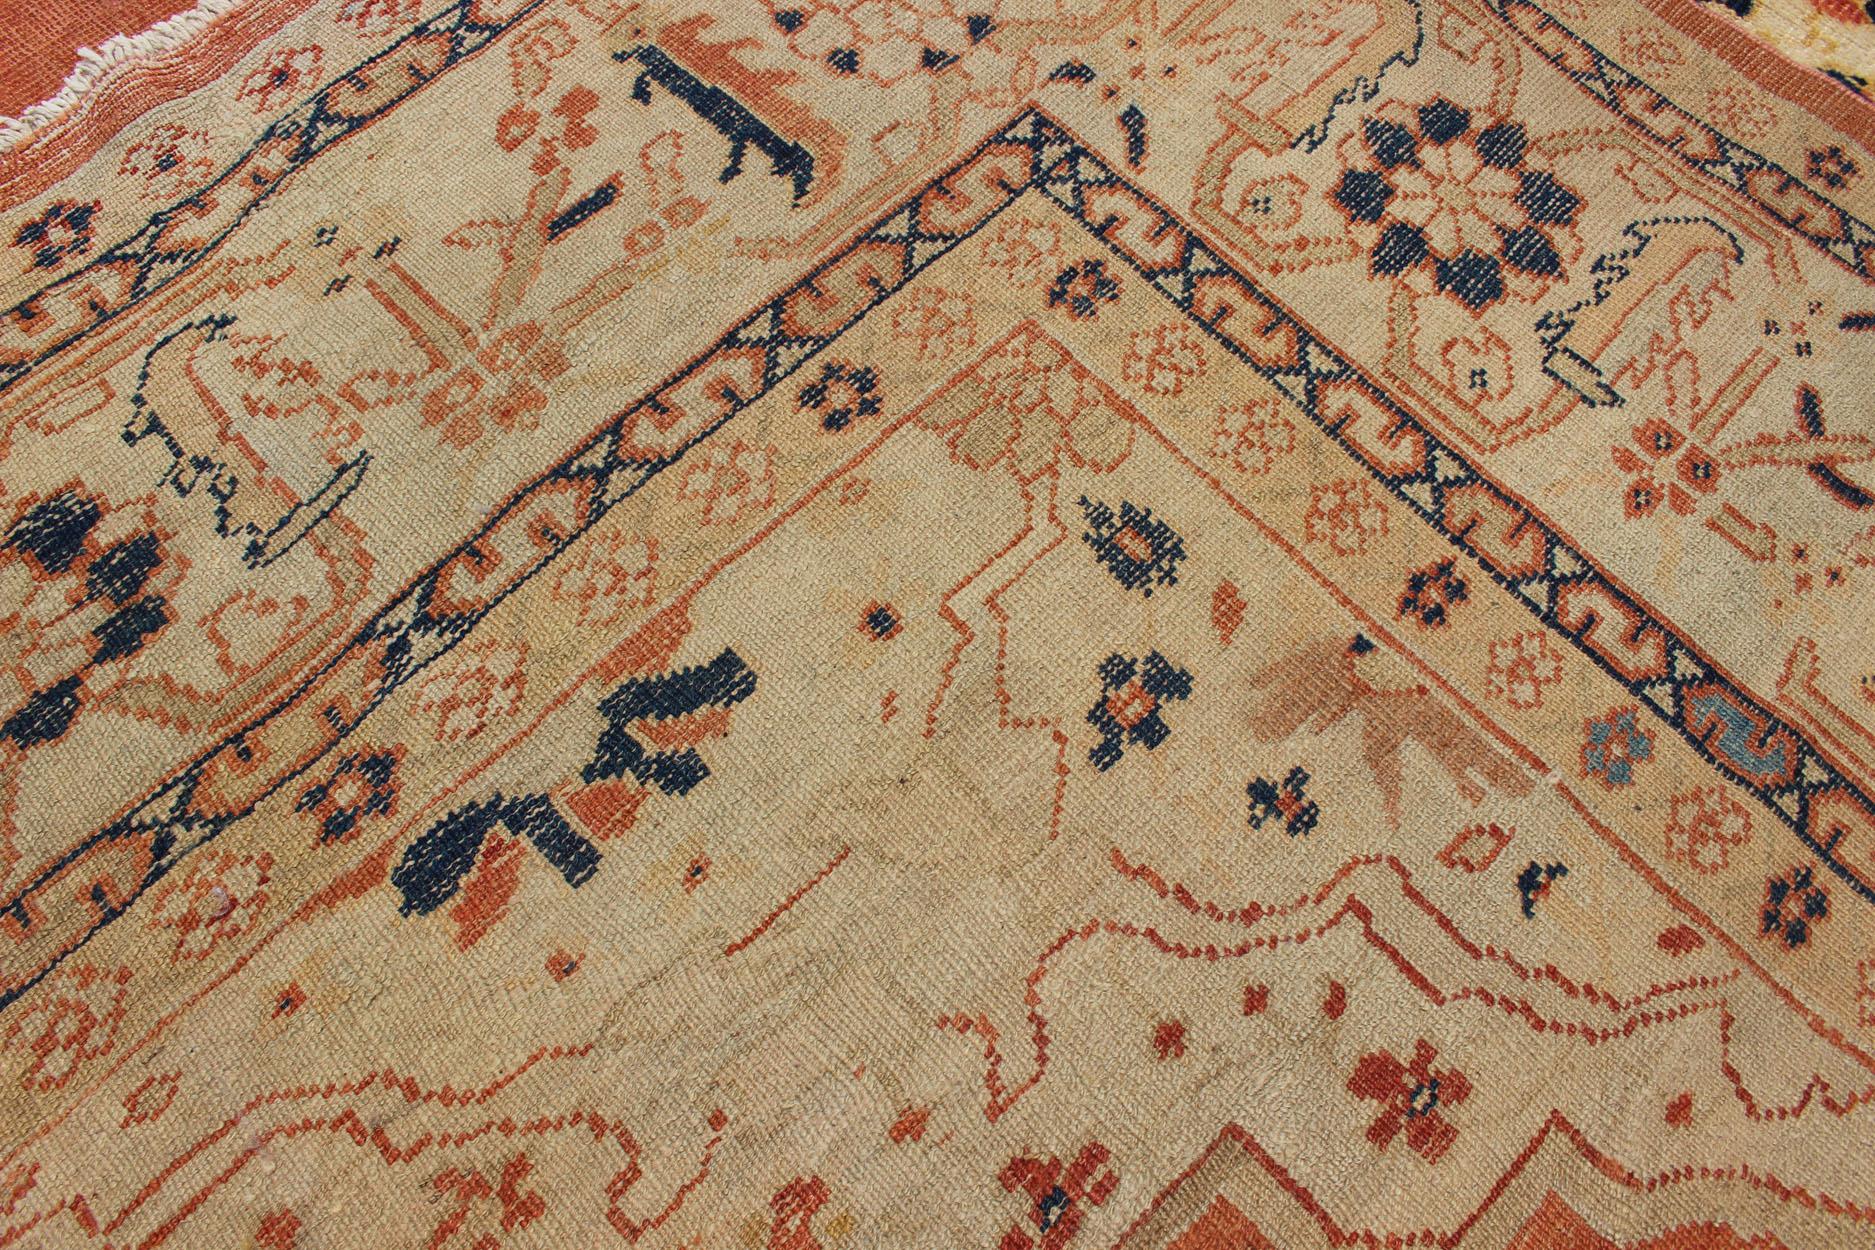 Antique Large Ziegler Sultanabad Rug in Soft Orange, Cream and Navy Blue For Sale 9